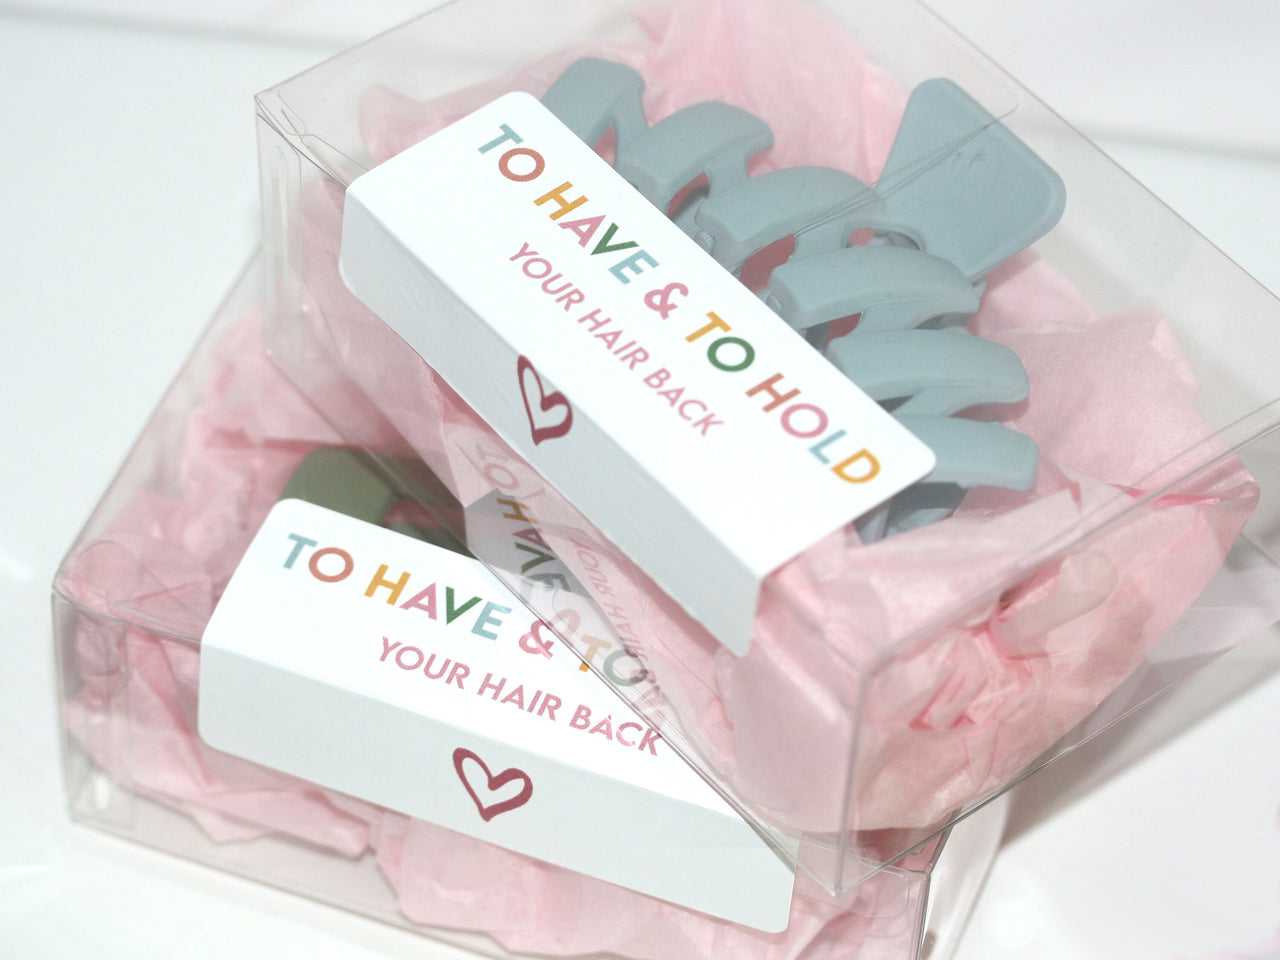 To have and to hold your hair back gift box with hair claw clip Bridesmaid Proposal